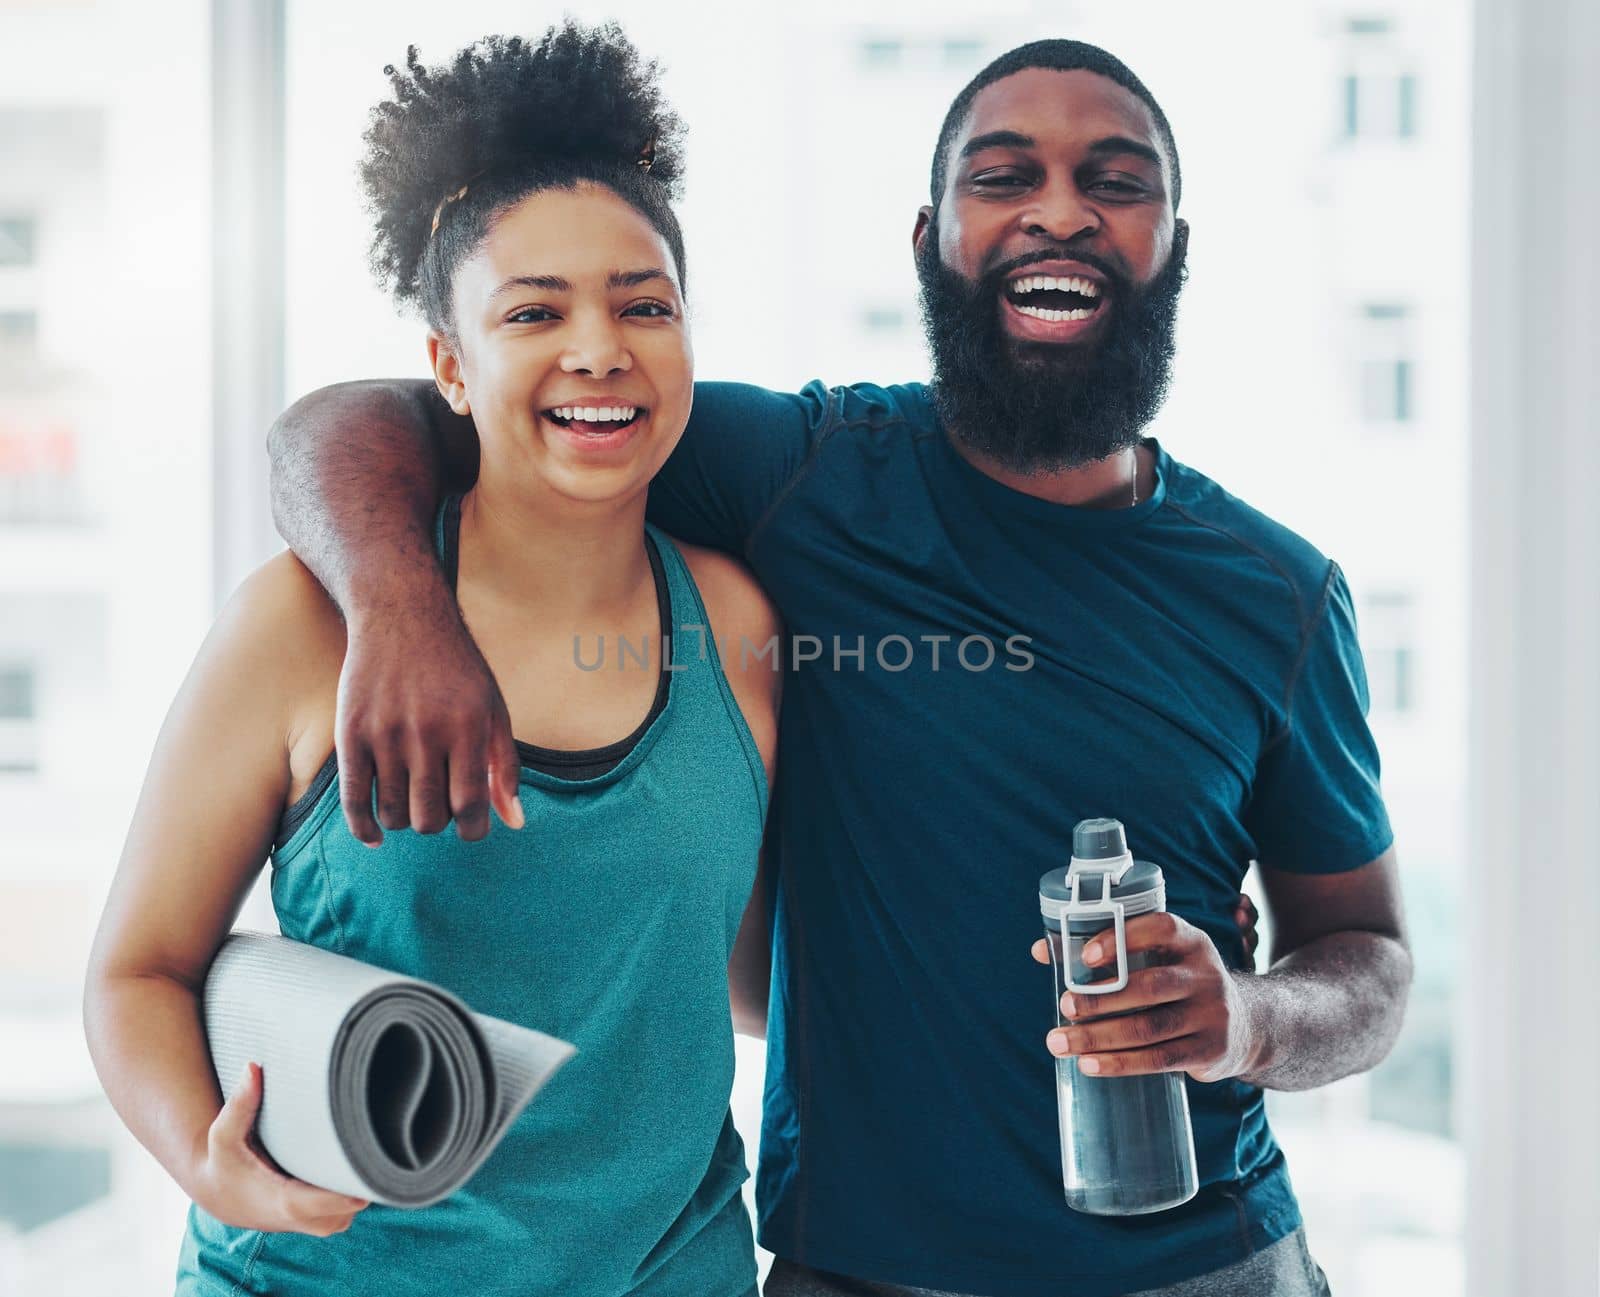 Portrait, yoga and a couple of friends in a gym for fitness while laughing at a joke or being funny together. Happy, excited and joy with yogi black people joking indoor during a wellness workout.